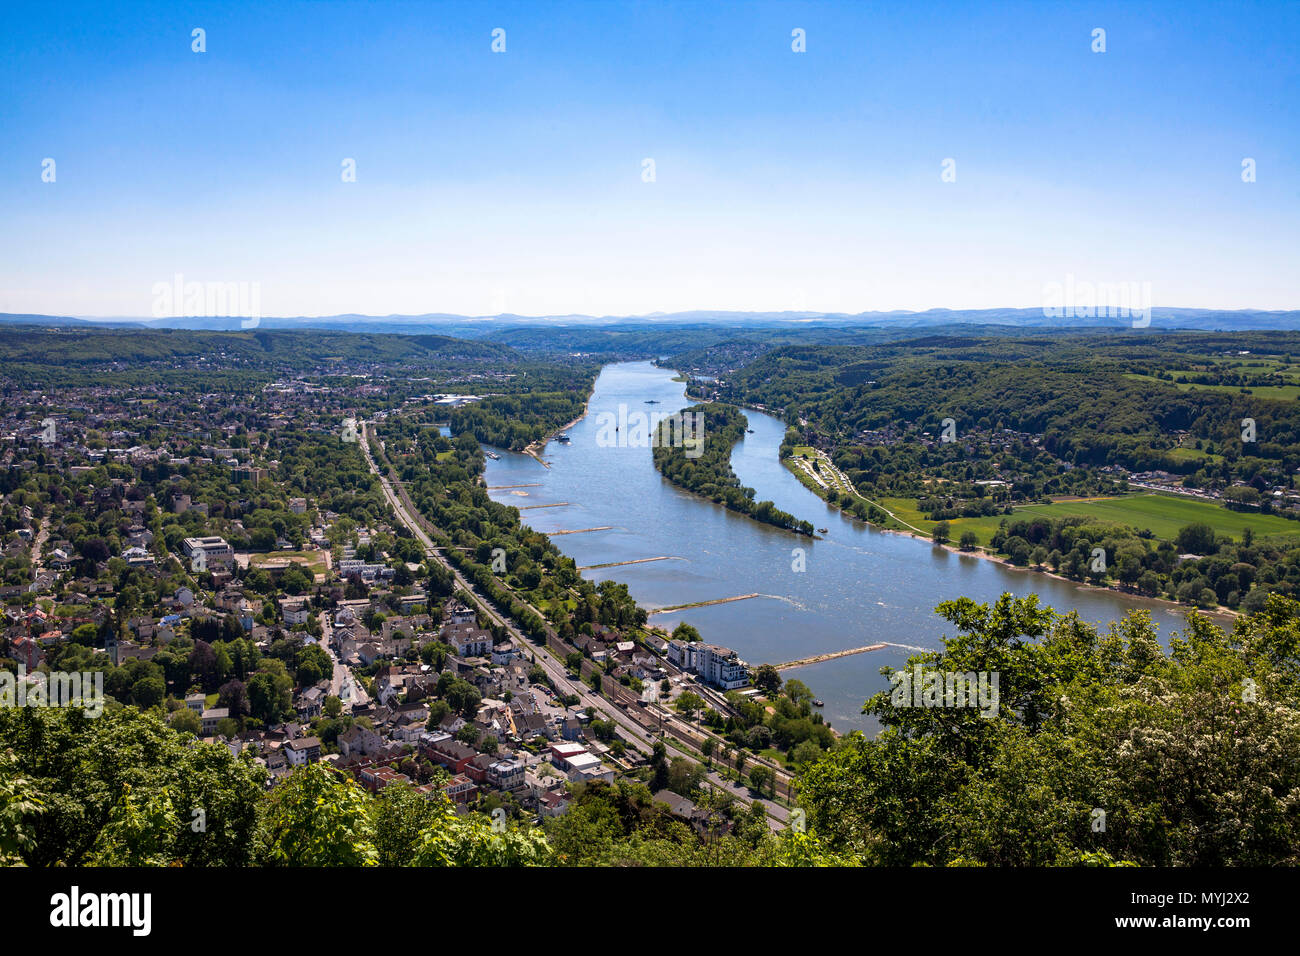 Fluvial Island High Resolution Stock Photography and Images - Alamy